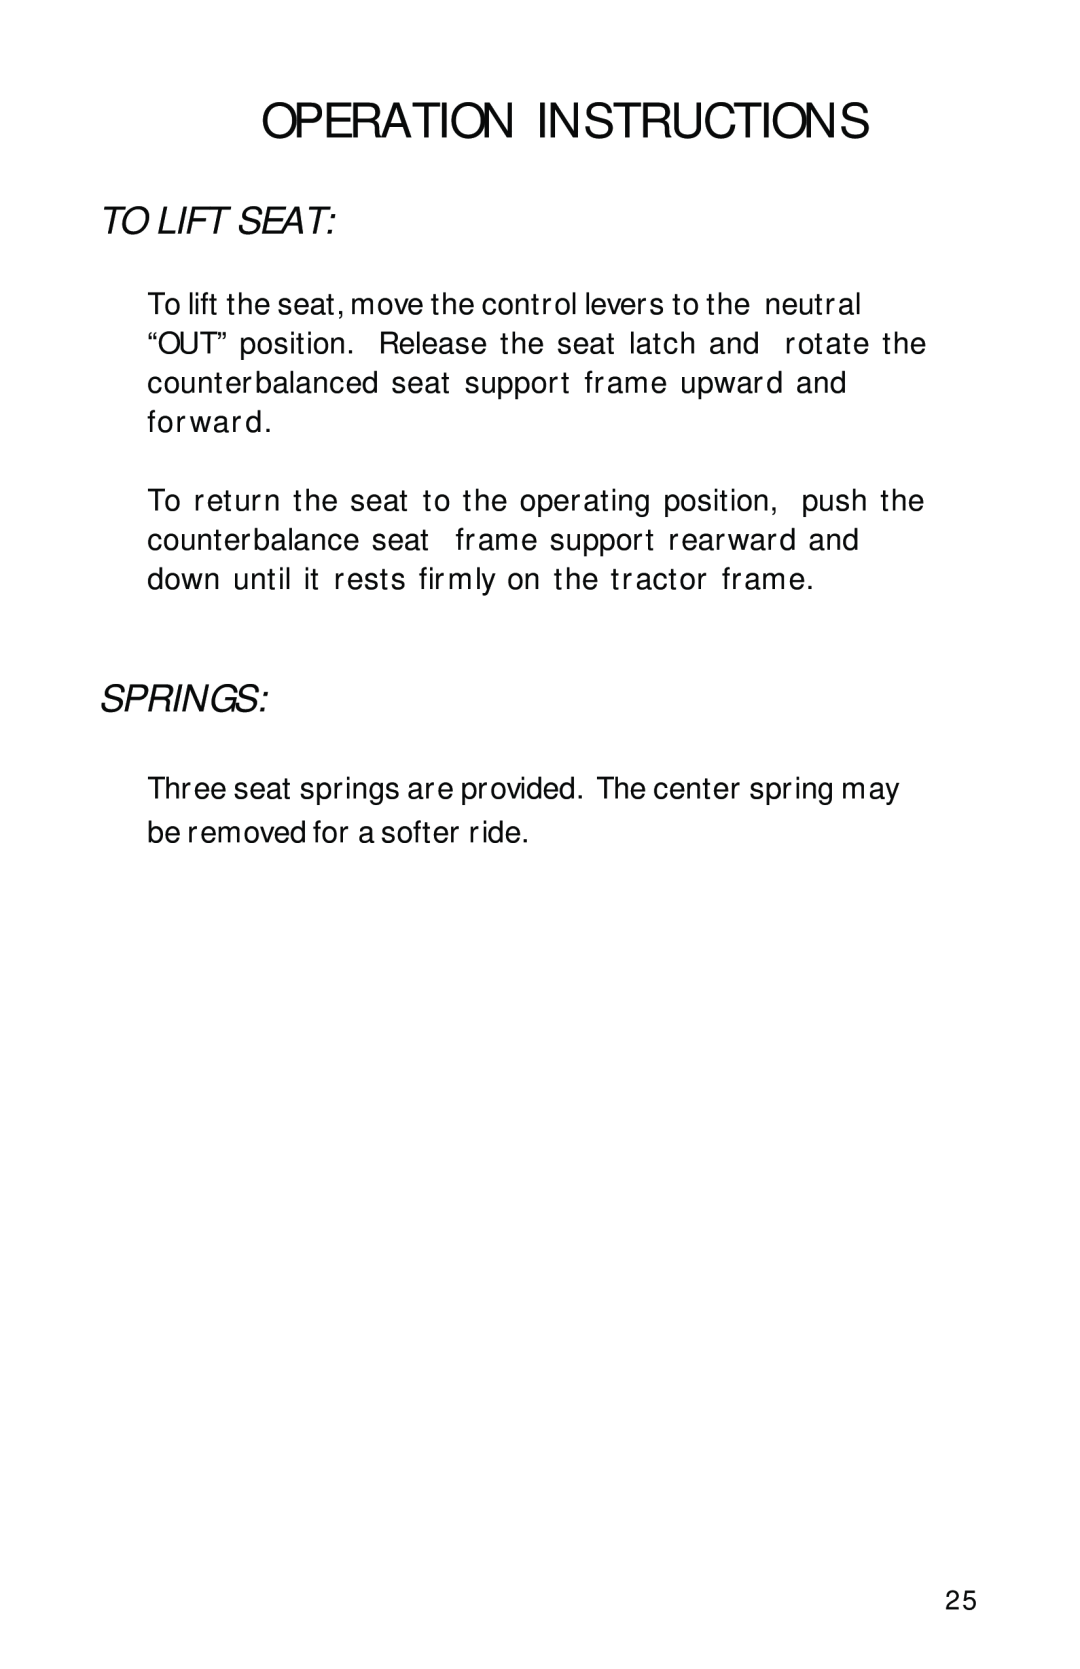 Dixon 12828-0603, ZTR 2700 manual To Lift Seat, Springs, Operation Instructions 